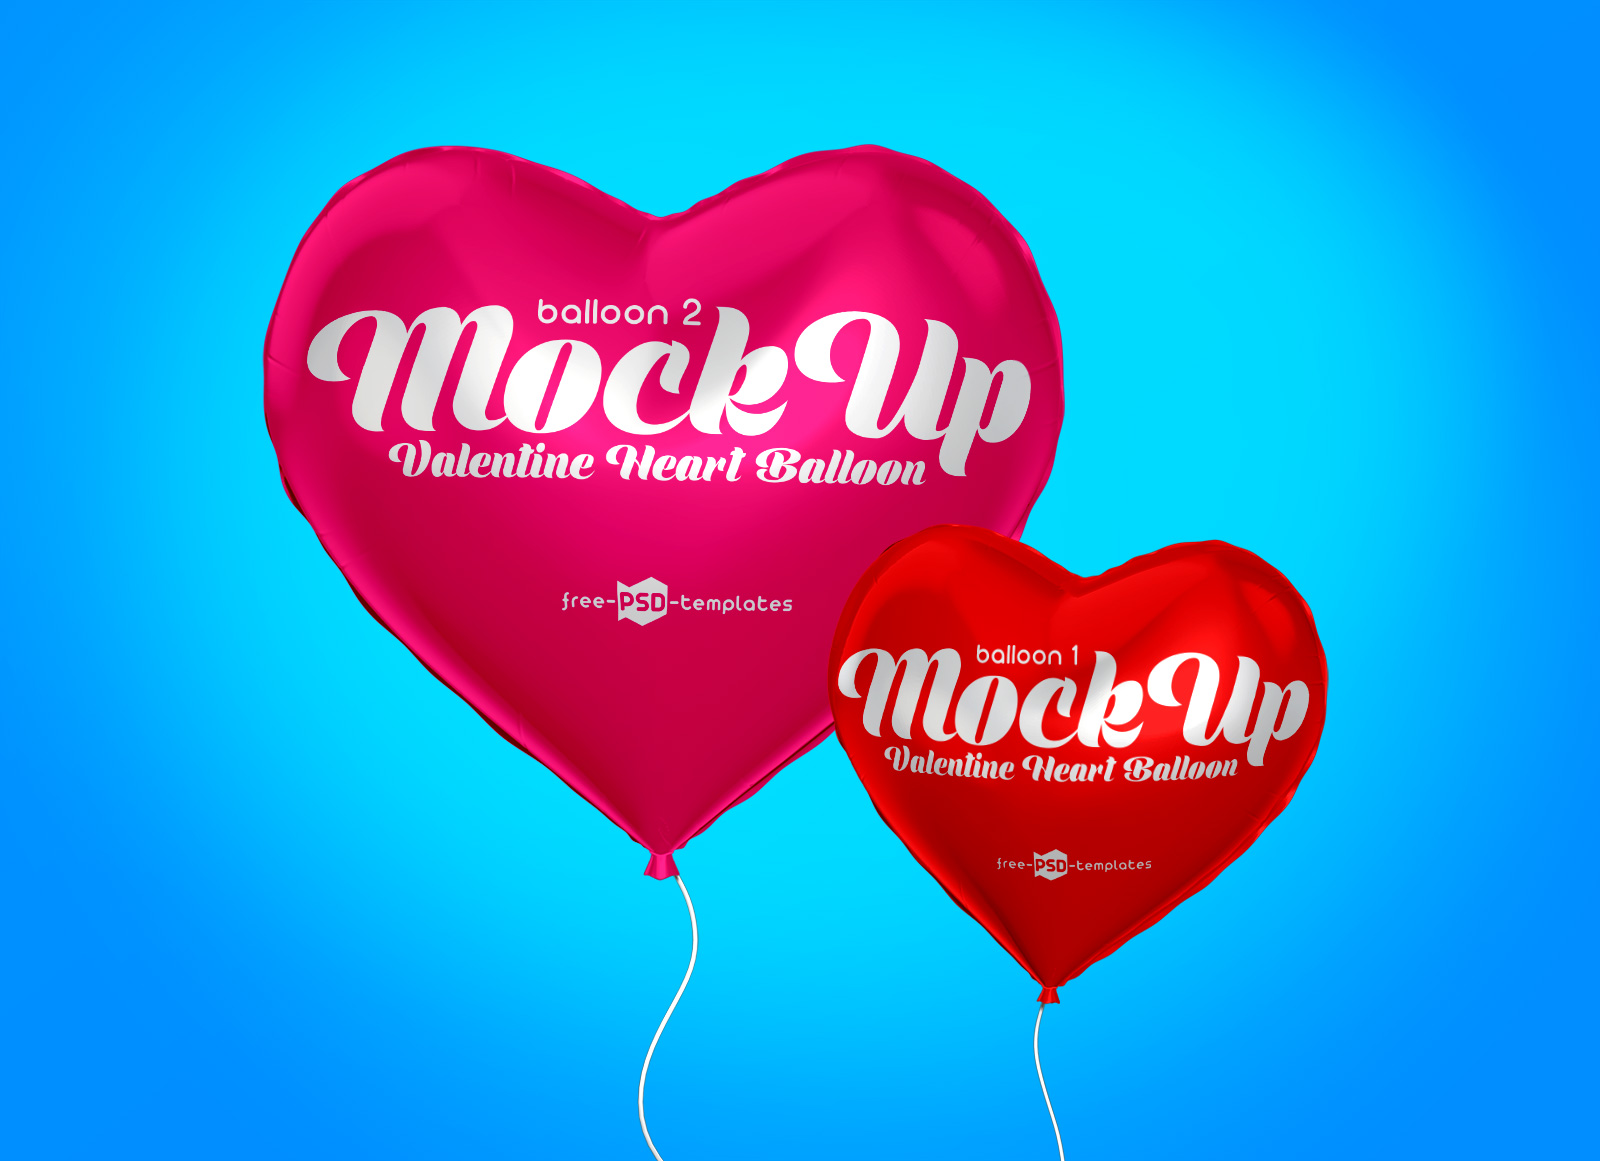 Heart Balloon Mockup for Valentine?s Day